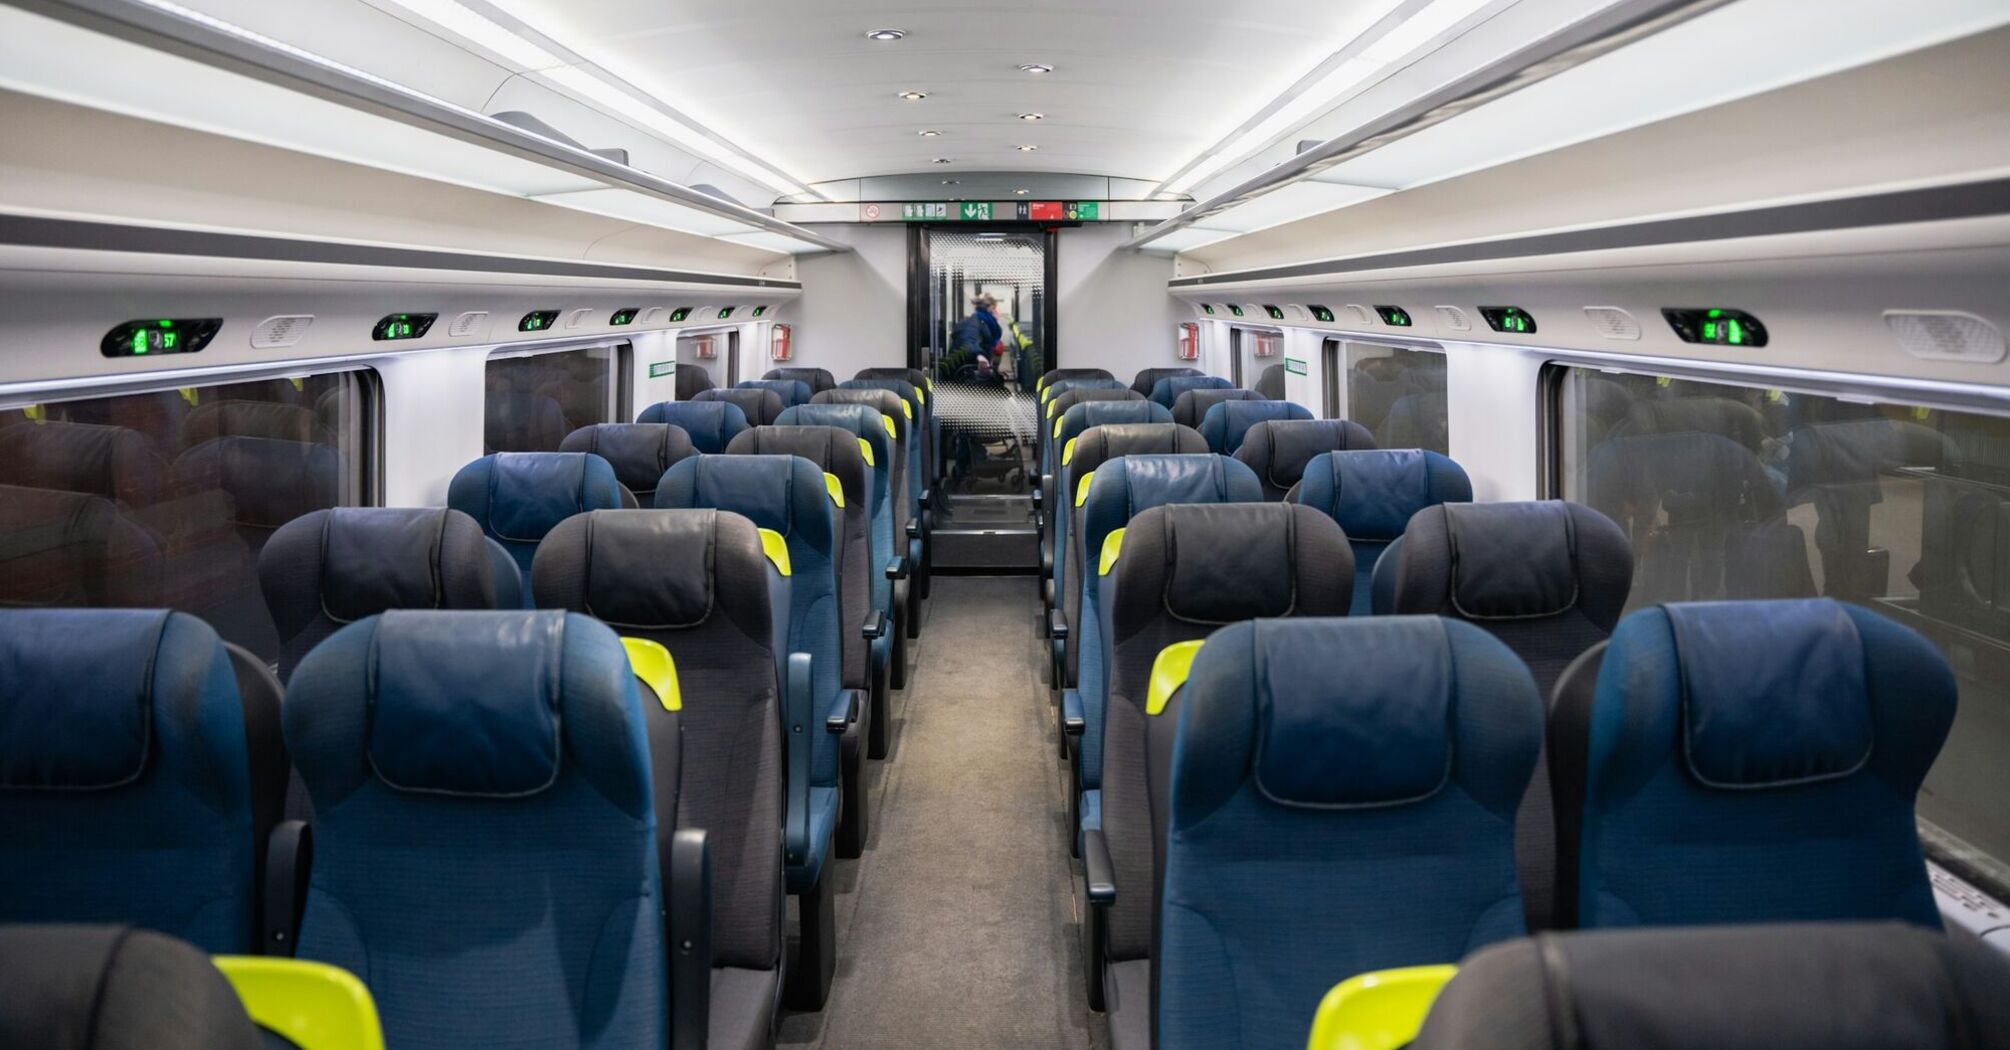 Interior of an empty Eurostar train carriage with rows of seats